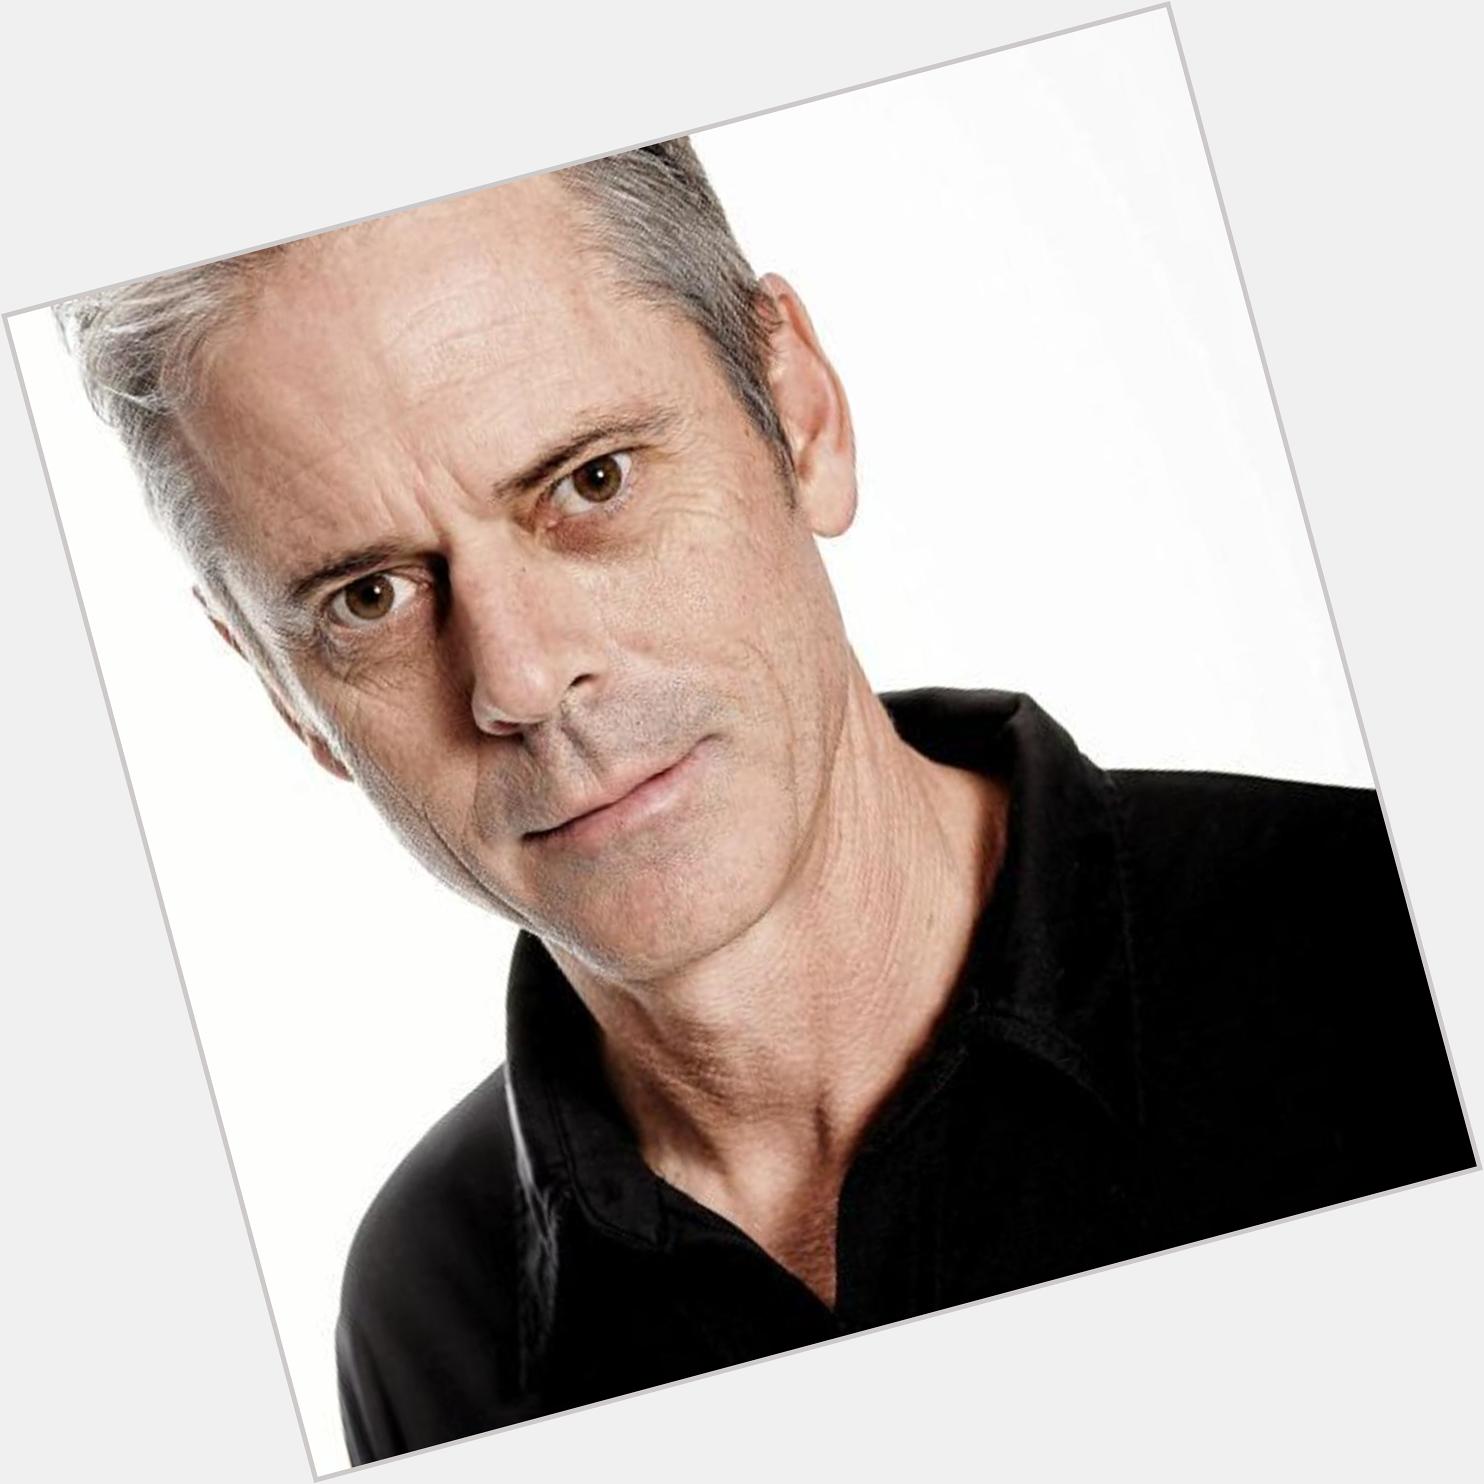 Happy birthday C. Thomas Howell! Hope you have a wonderful day! 